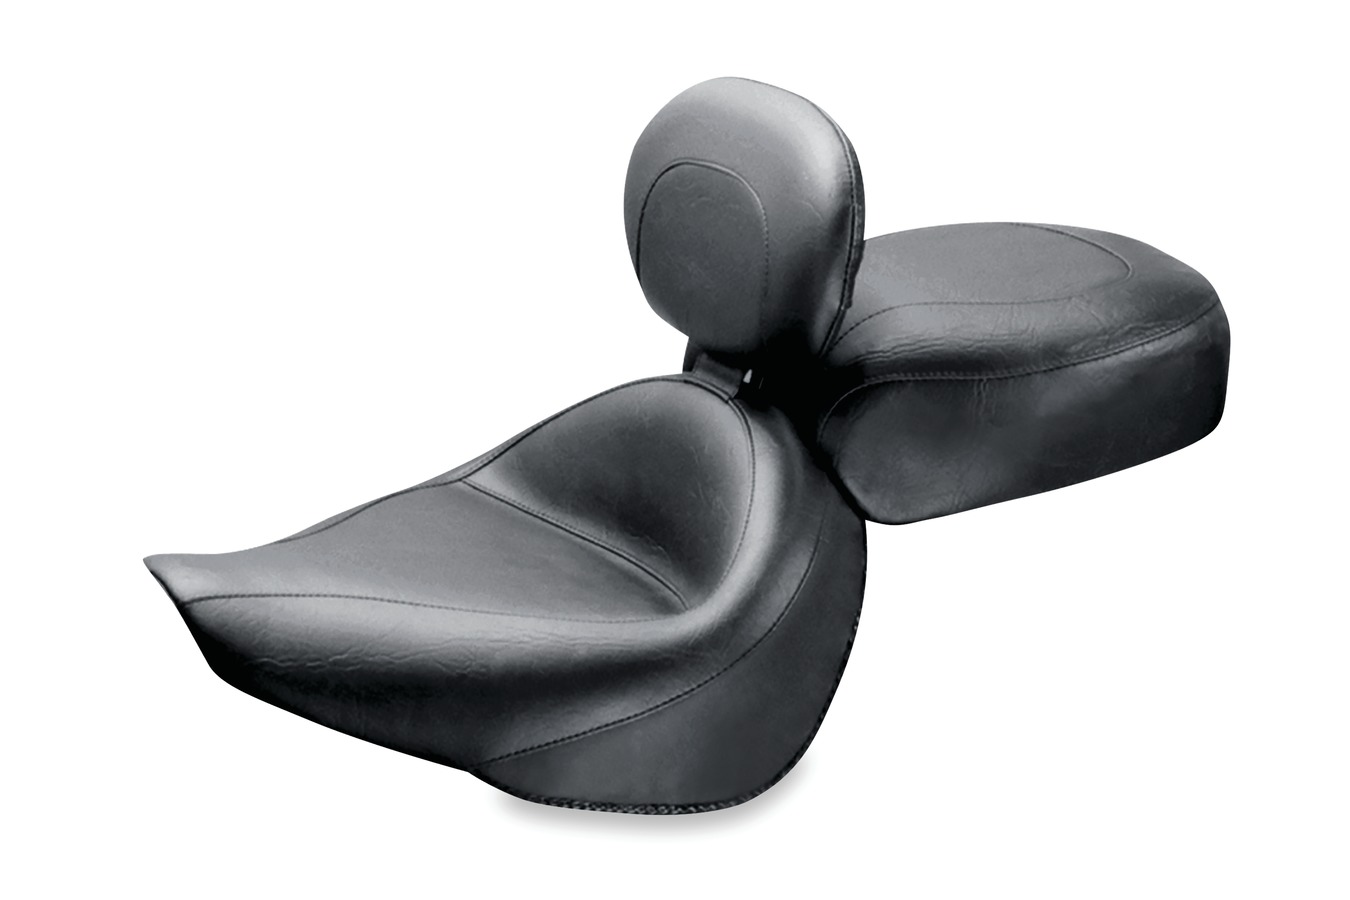 Standard Touring Two-Piece Seat with Driver Backrest for Kawasaki Vulcan 800 1995-